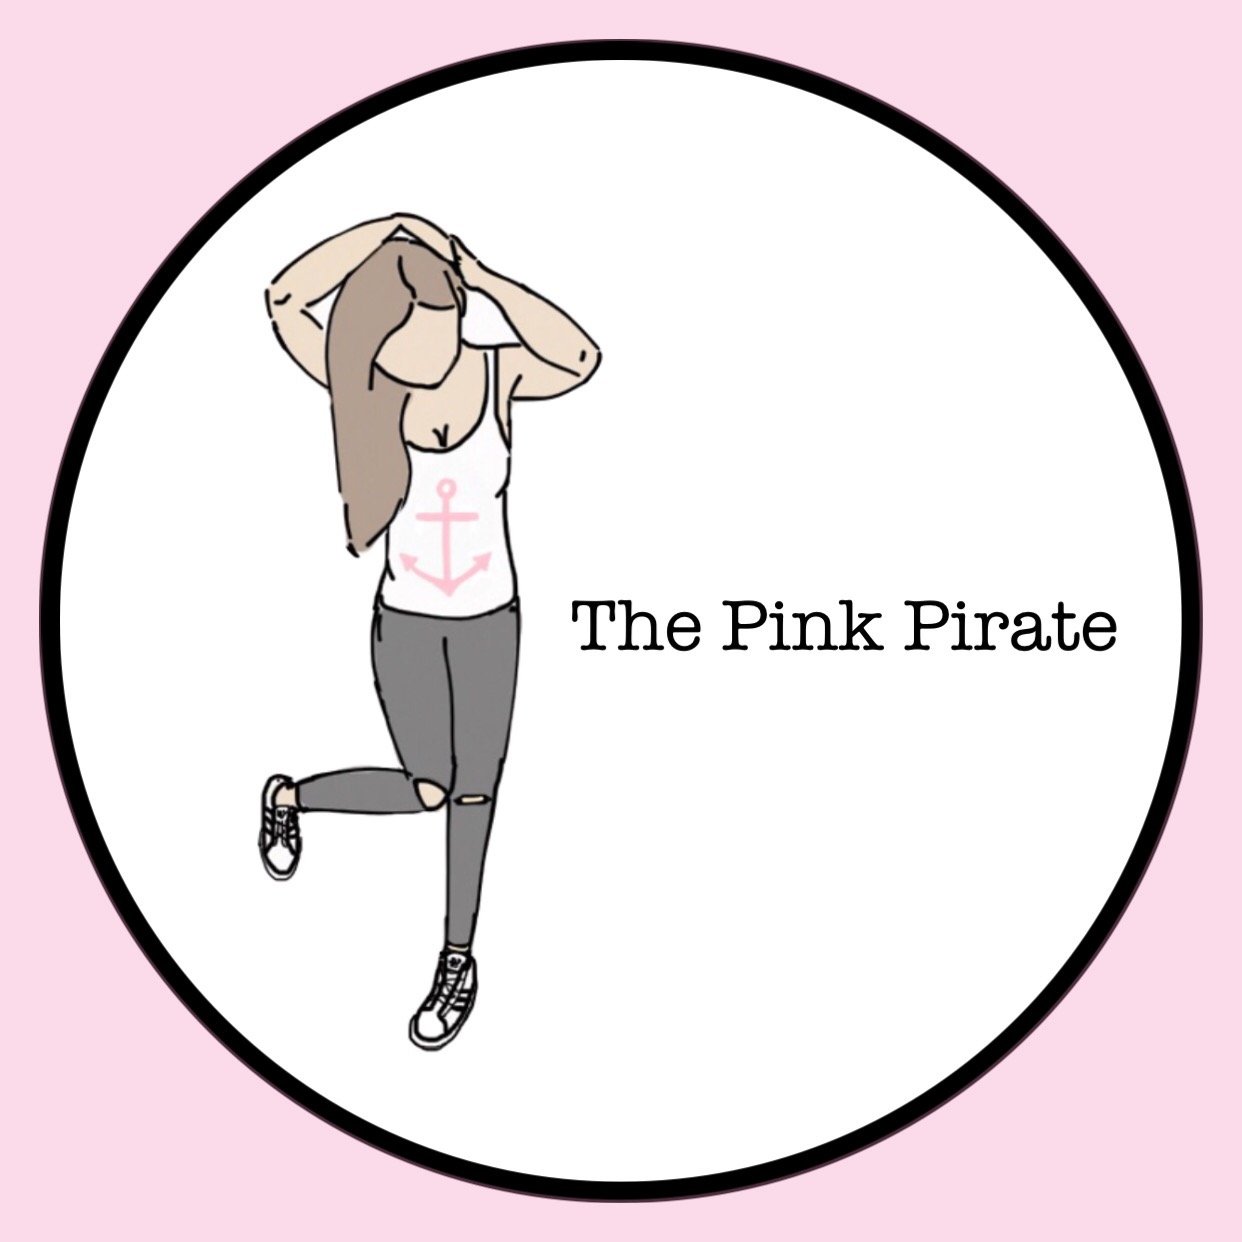 The Pink Pirate